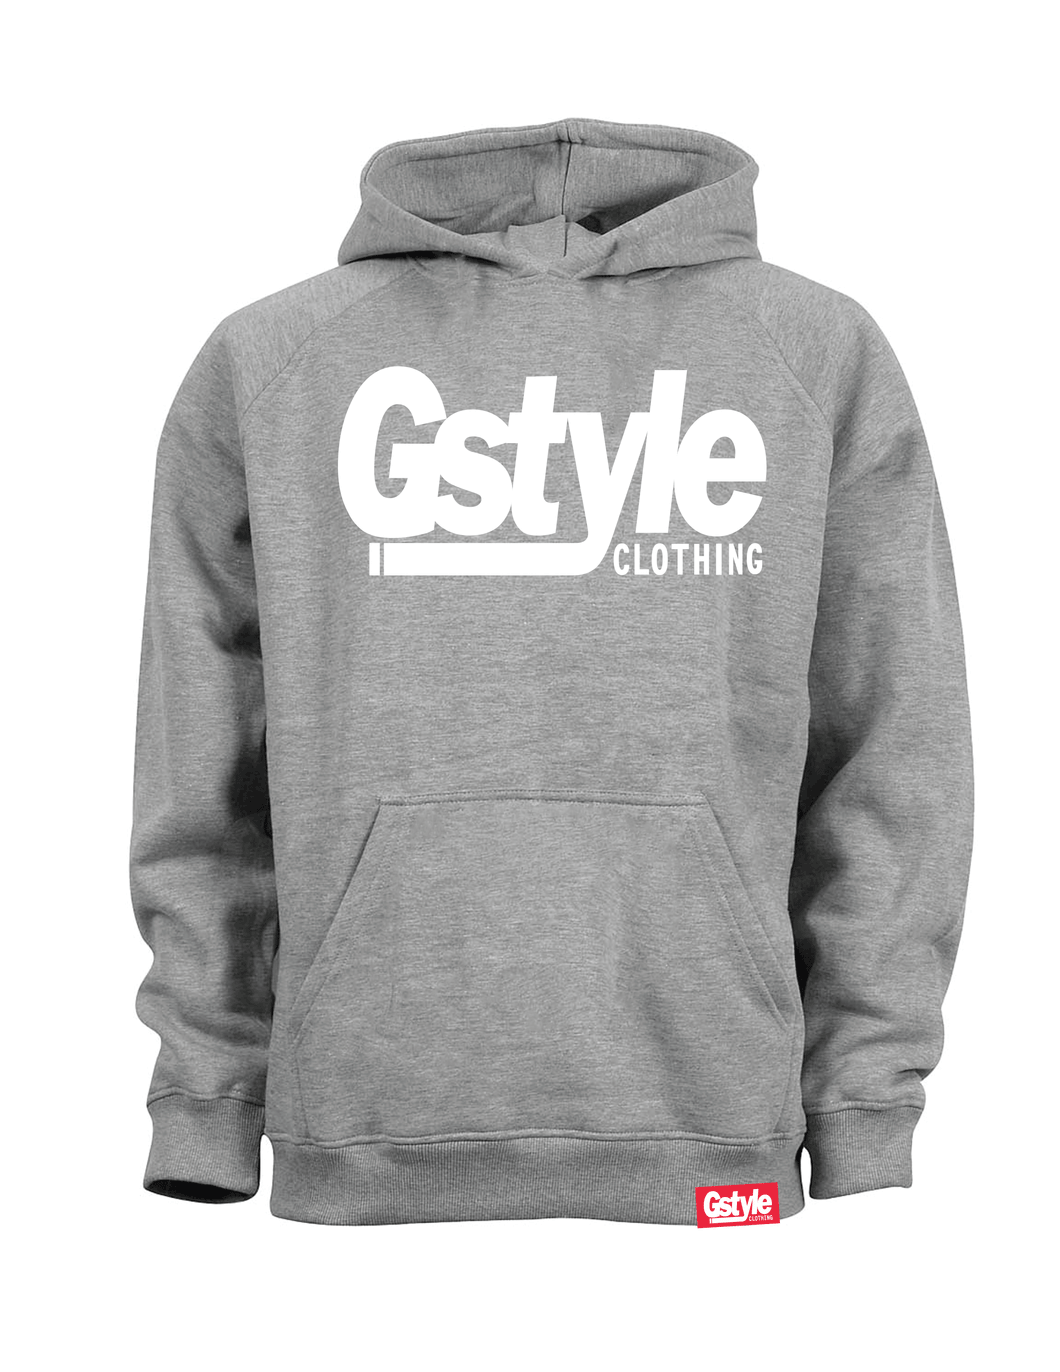 Gstyle Hoodie